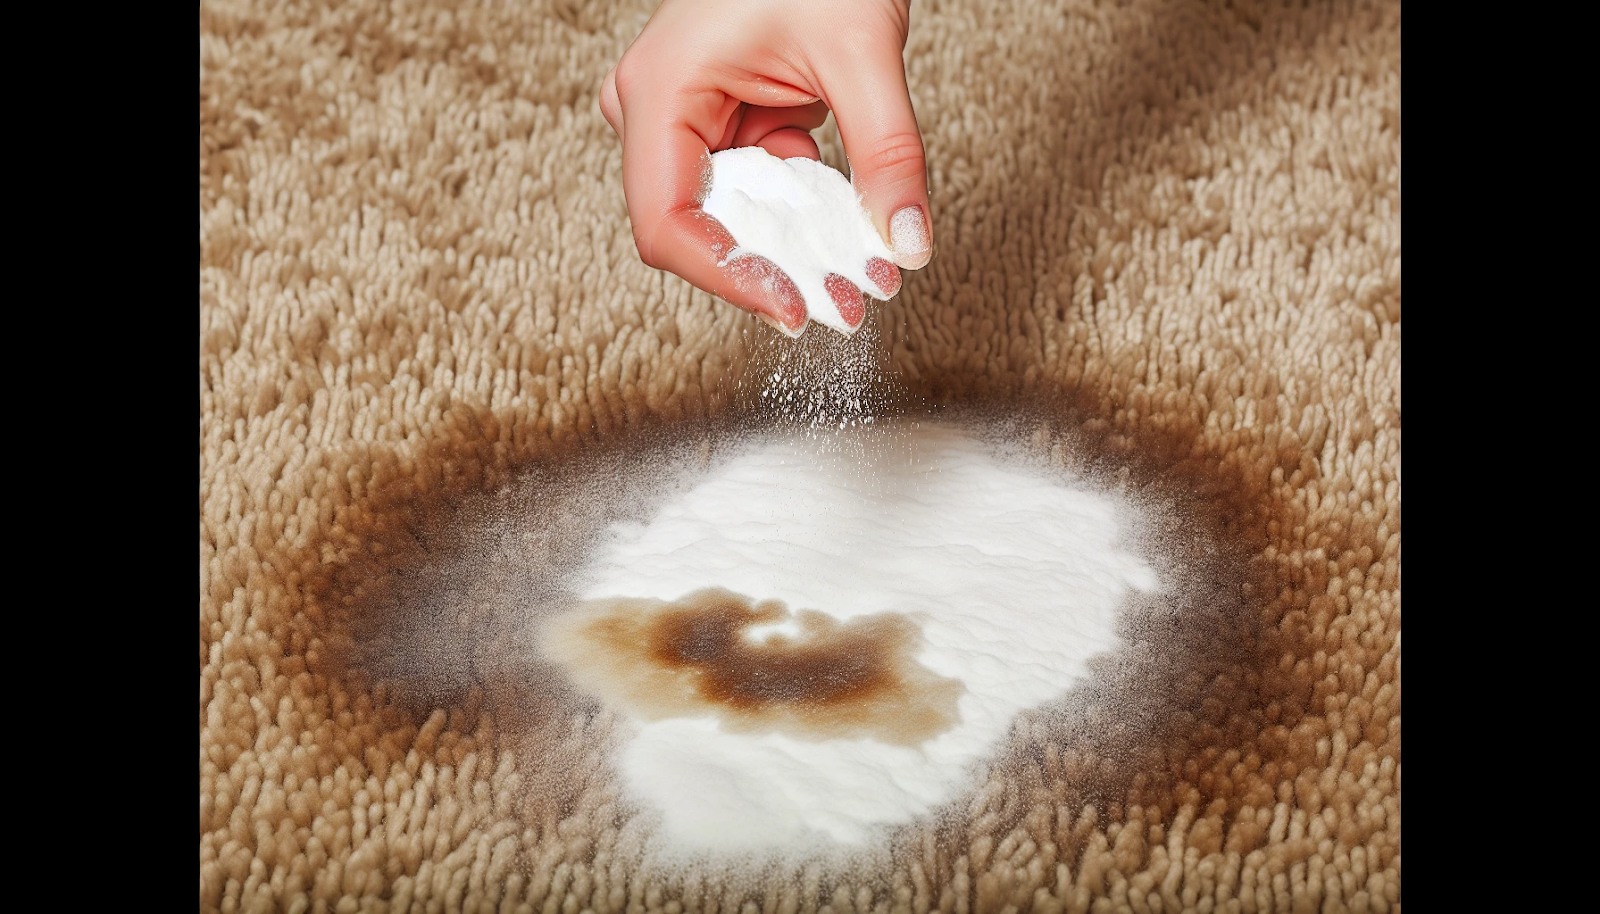 Baking soda sprinkled on a carpet to absorb oil stains